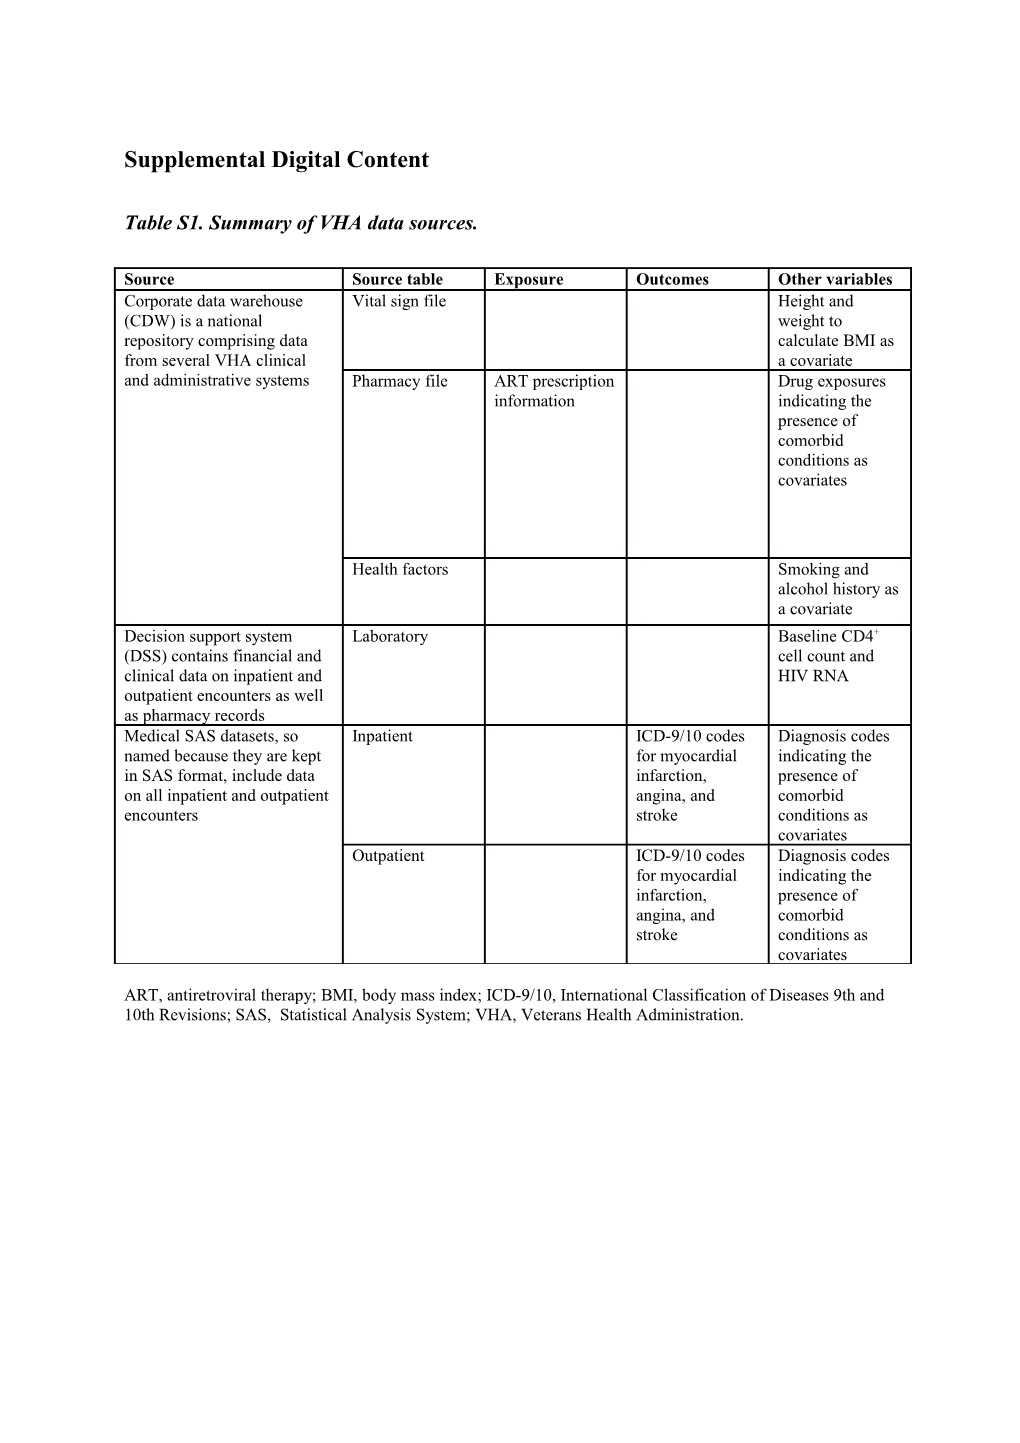 Table S1. Summary of VHA Data Sources